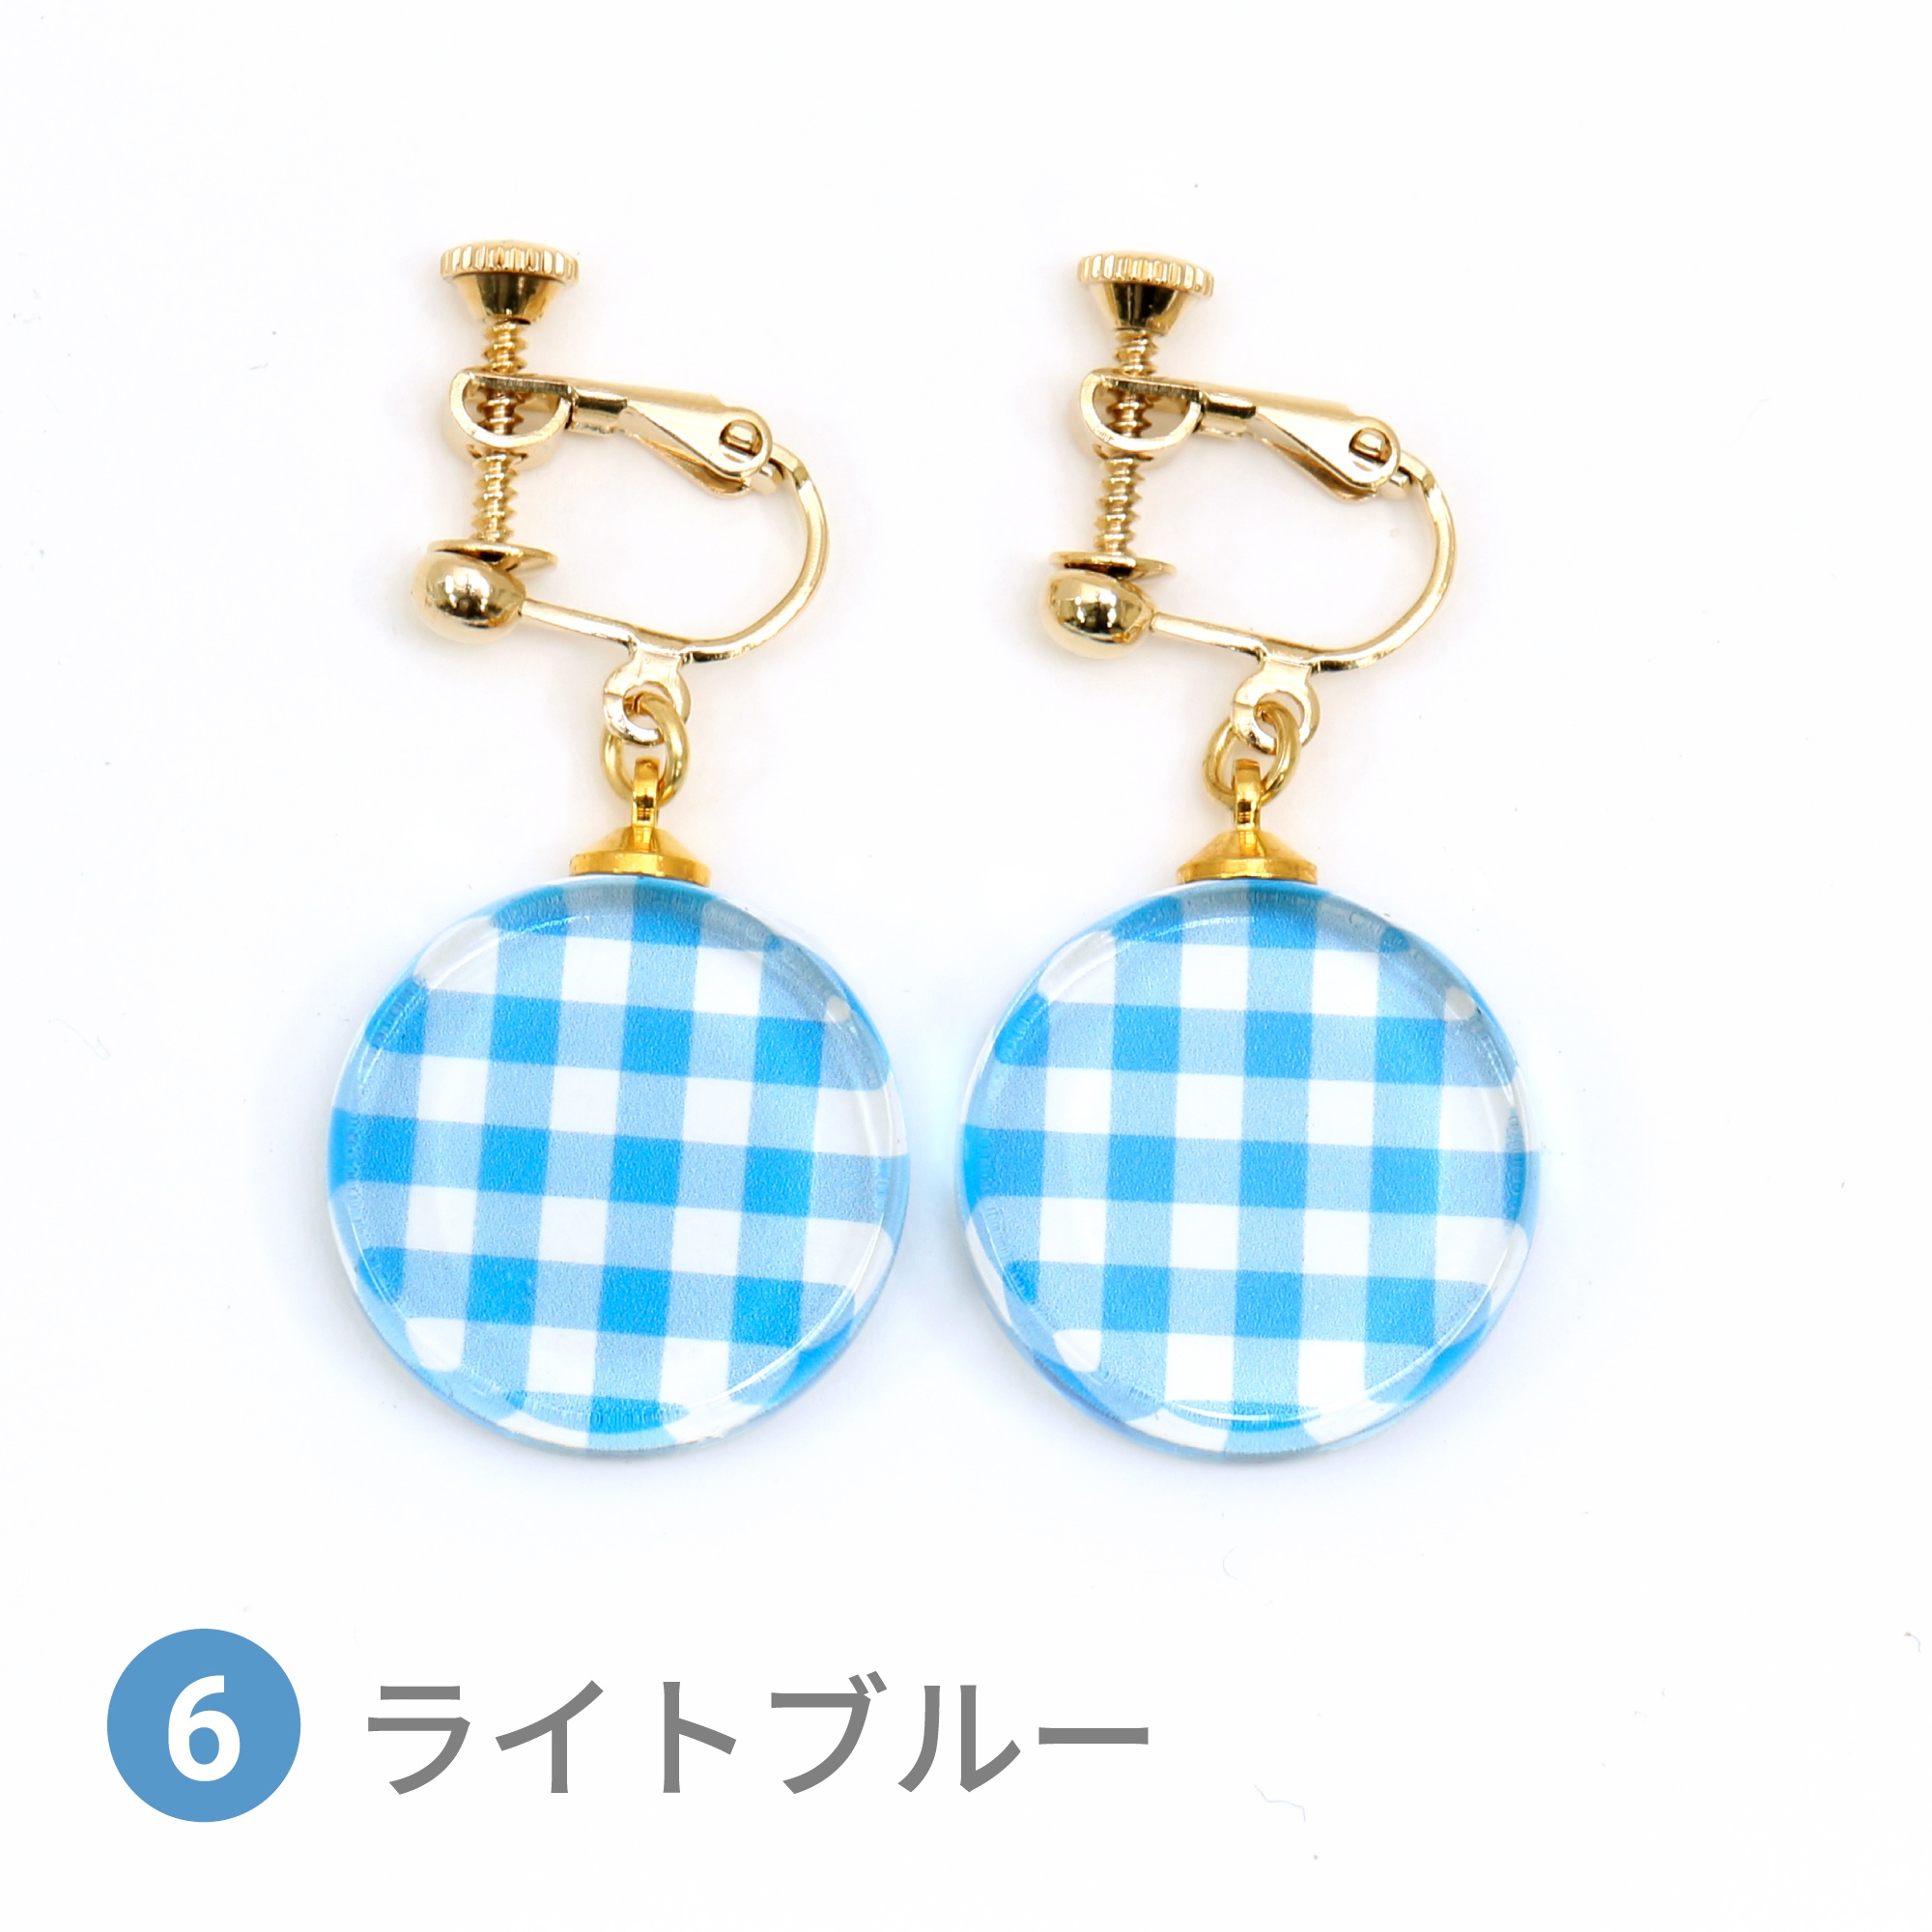 Glass accessories Earring GINGHAM CHECK lightblue round shape